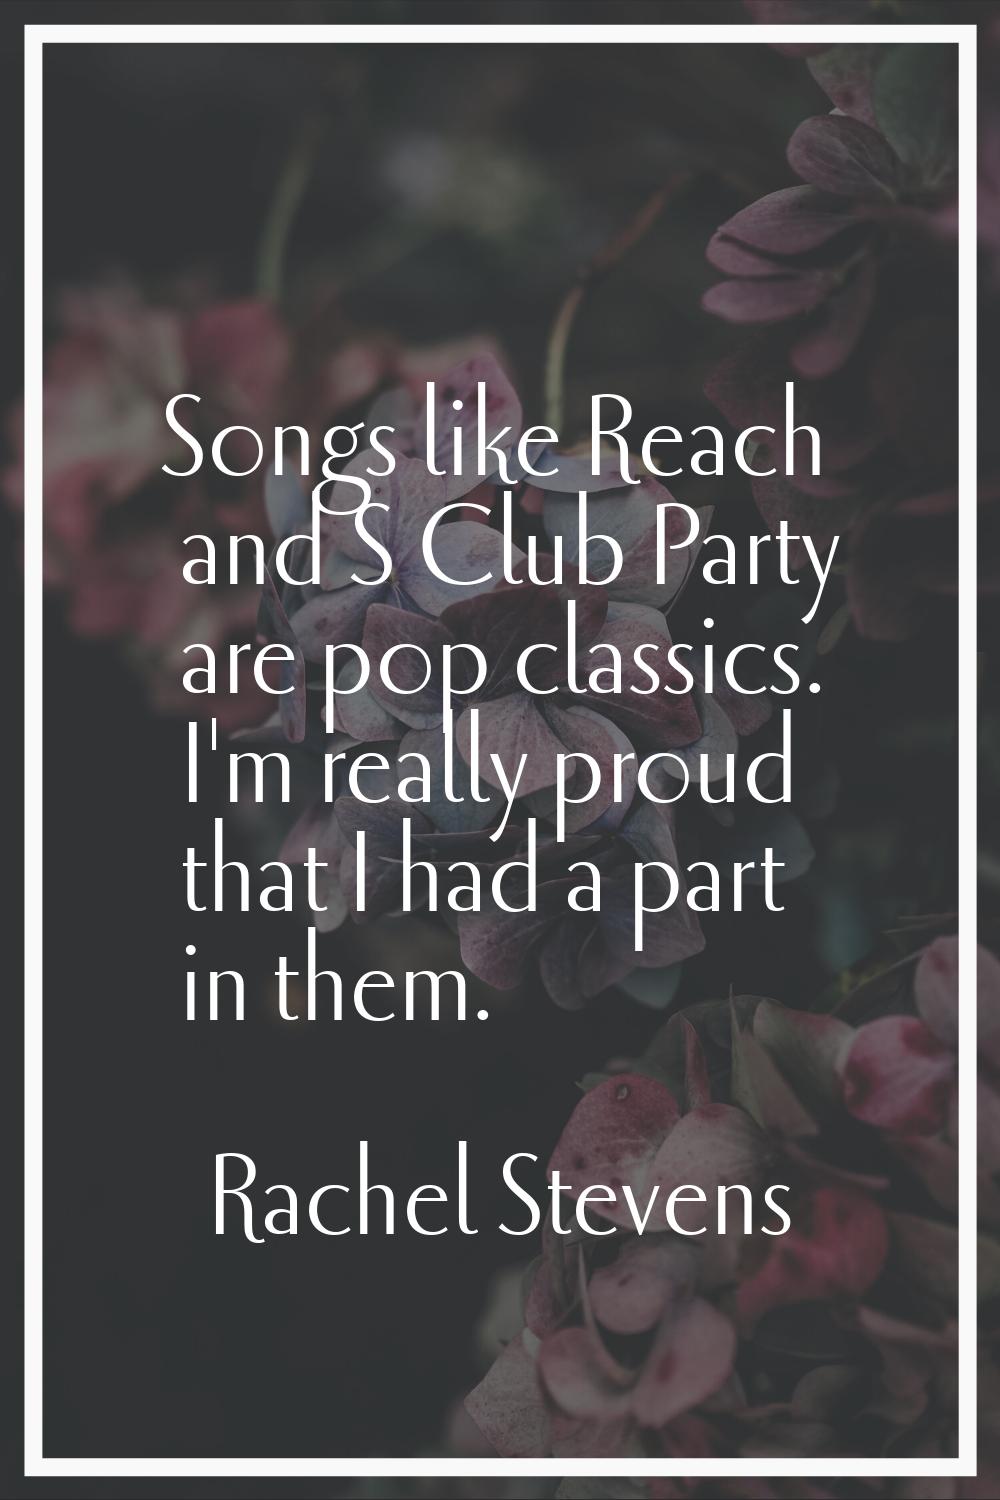 Songs like Reach and S Club Party are pop classics. I'm really proud that I had a part in them.